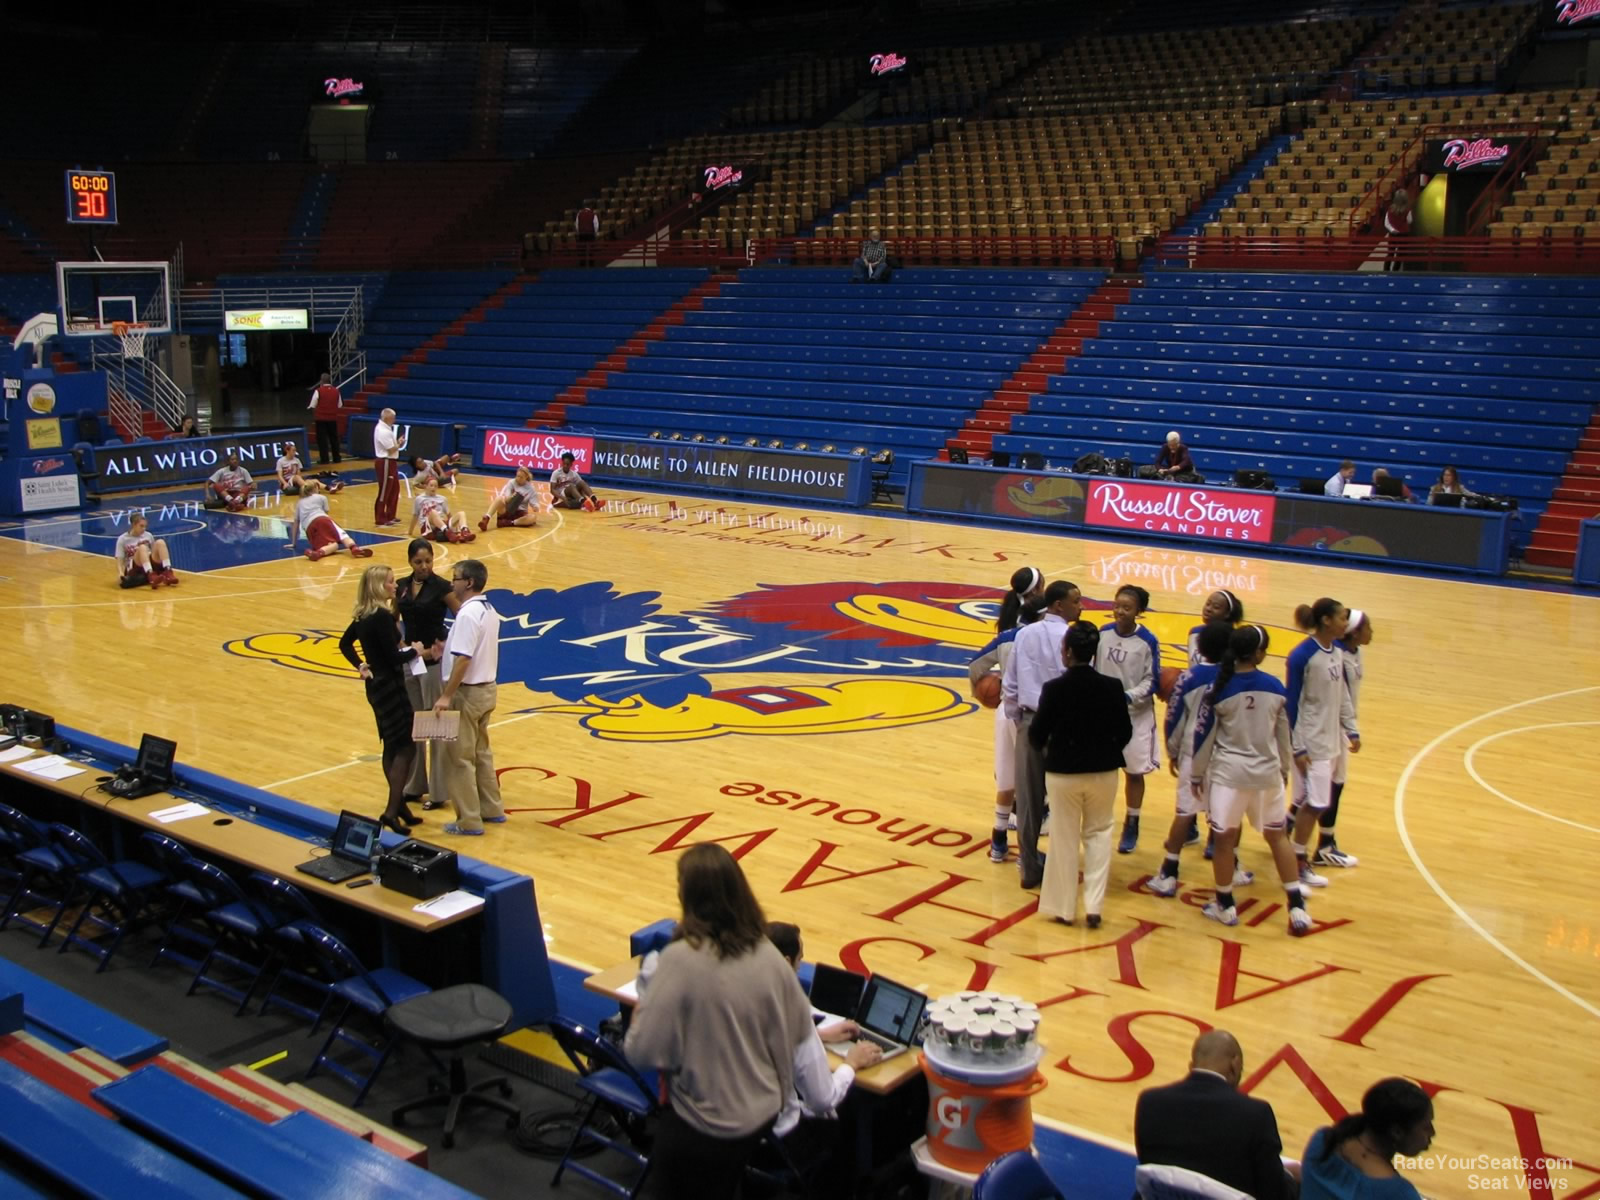 section r, row 7 seat view  - allen fieldhouse